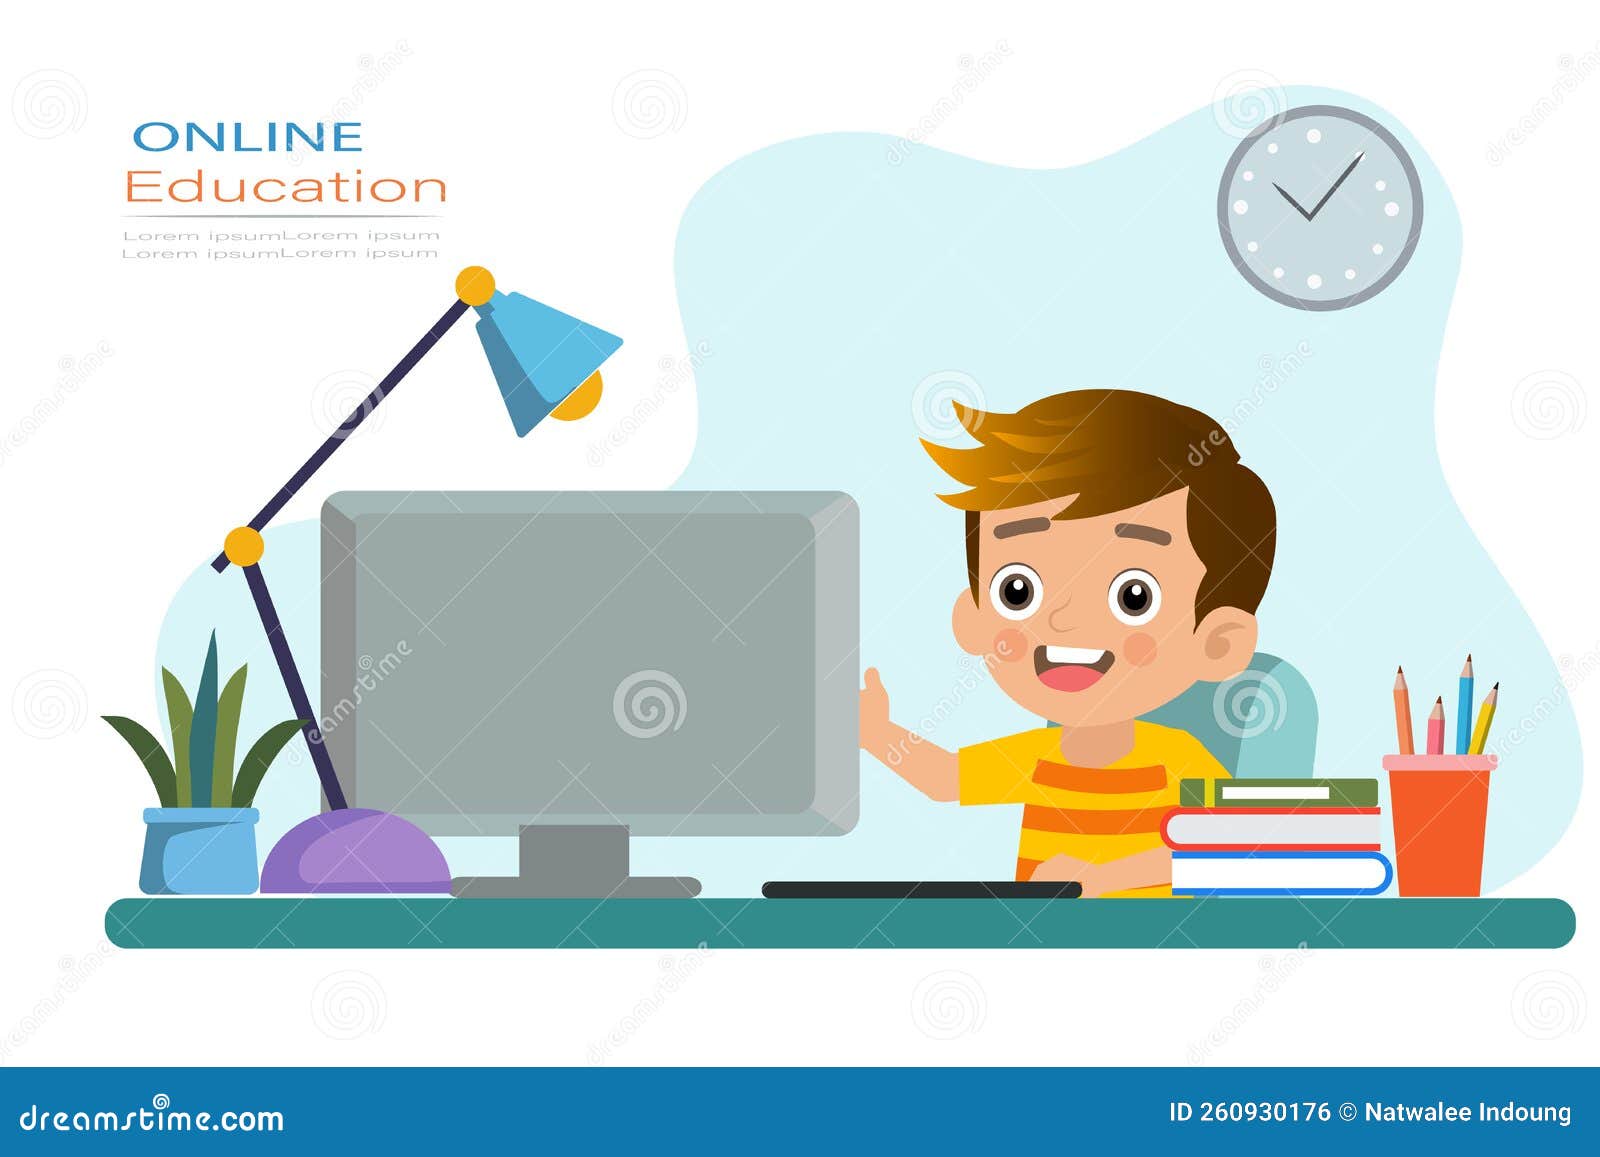 Online Learning Template with Children Studying with Computer. Vector ...